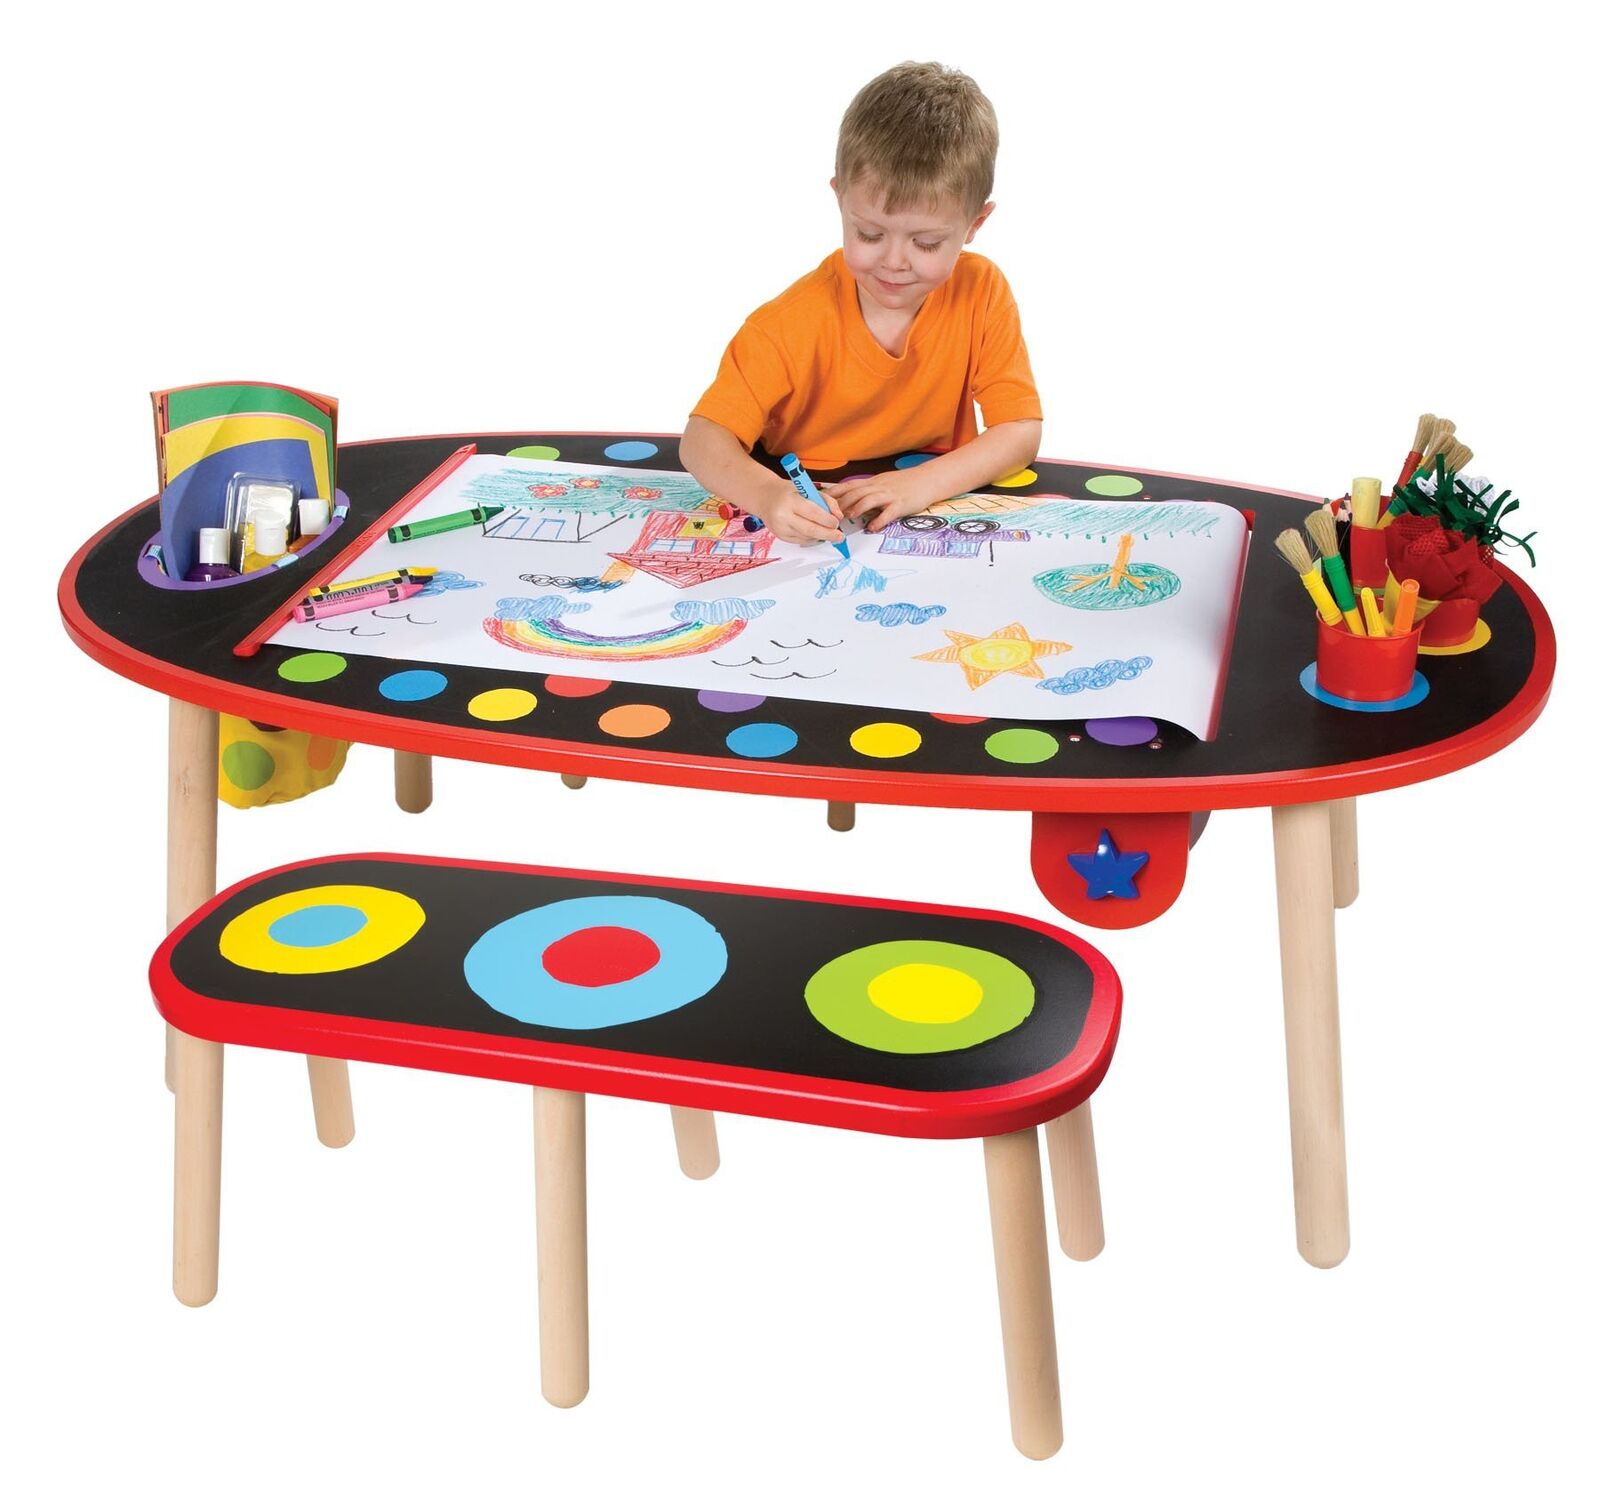 ALEX Toys Super Art Table with Paper Roll Kids Art Supplies